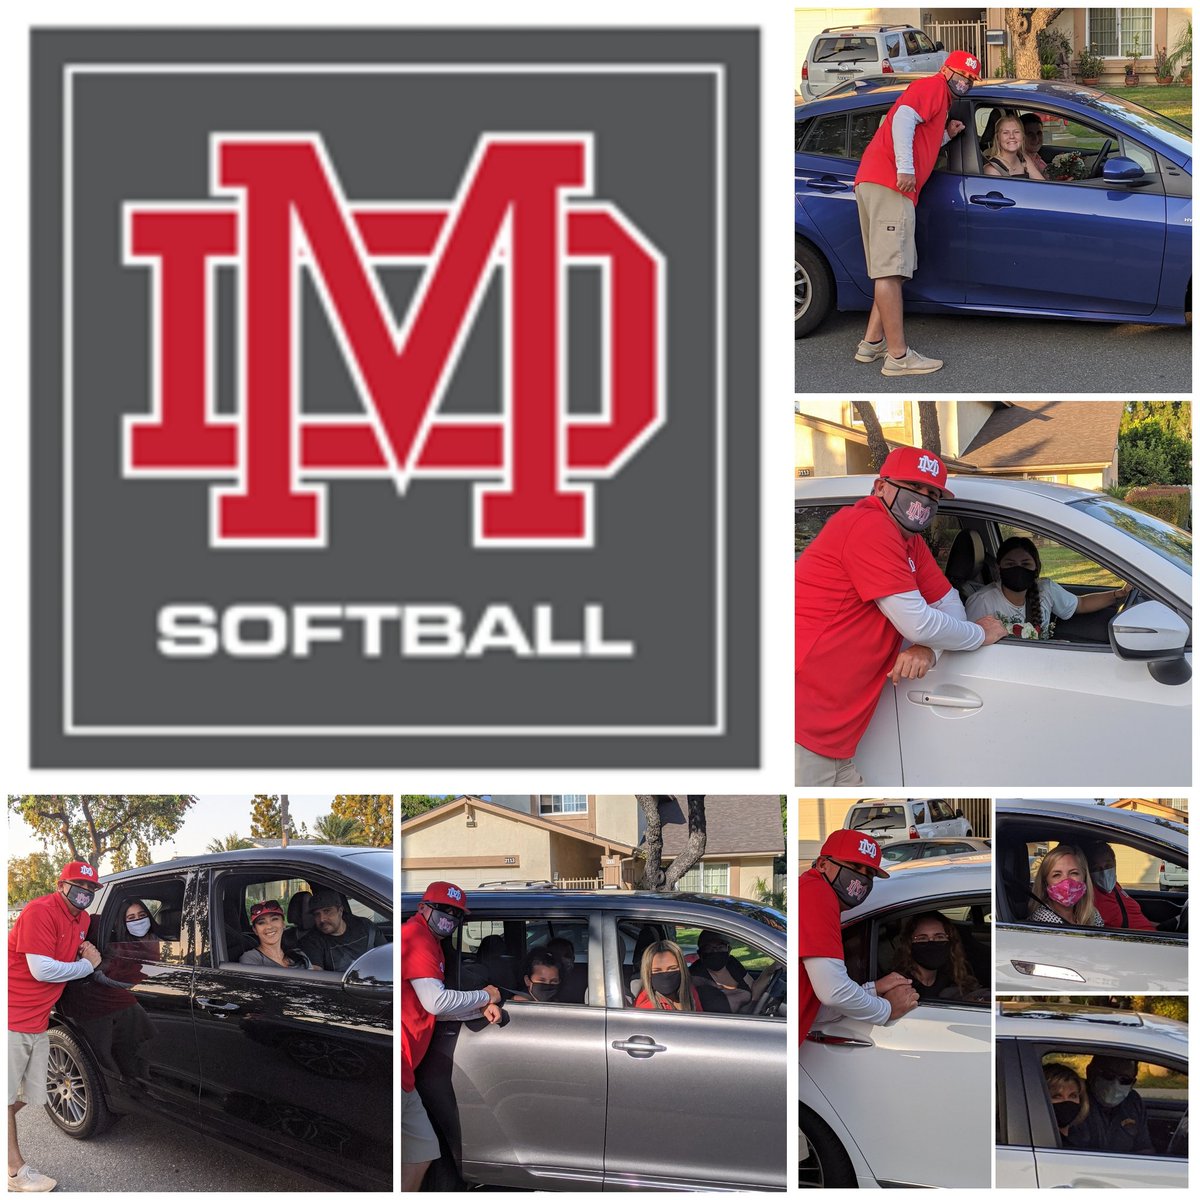 Our Varsity Softball Drive Thru was a huge success! Thank you to everyone that made this possible for the girls! @MD_Athletics